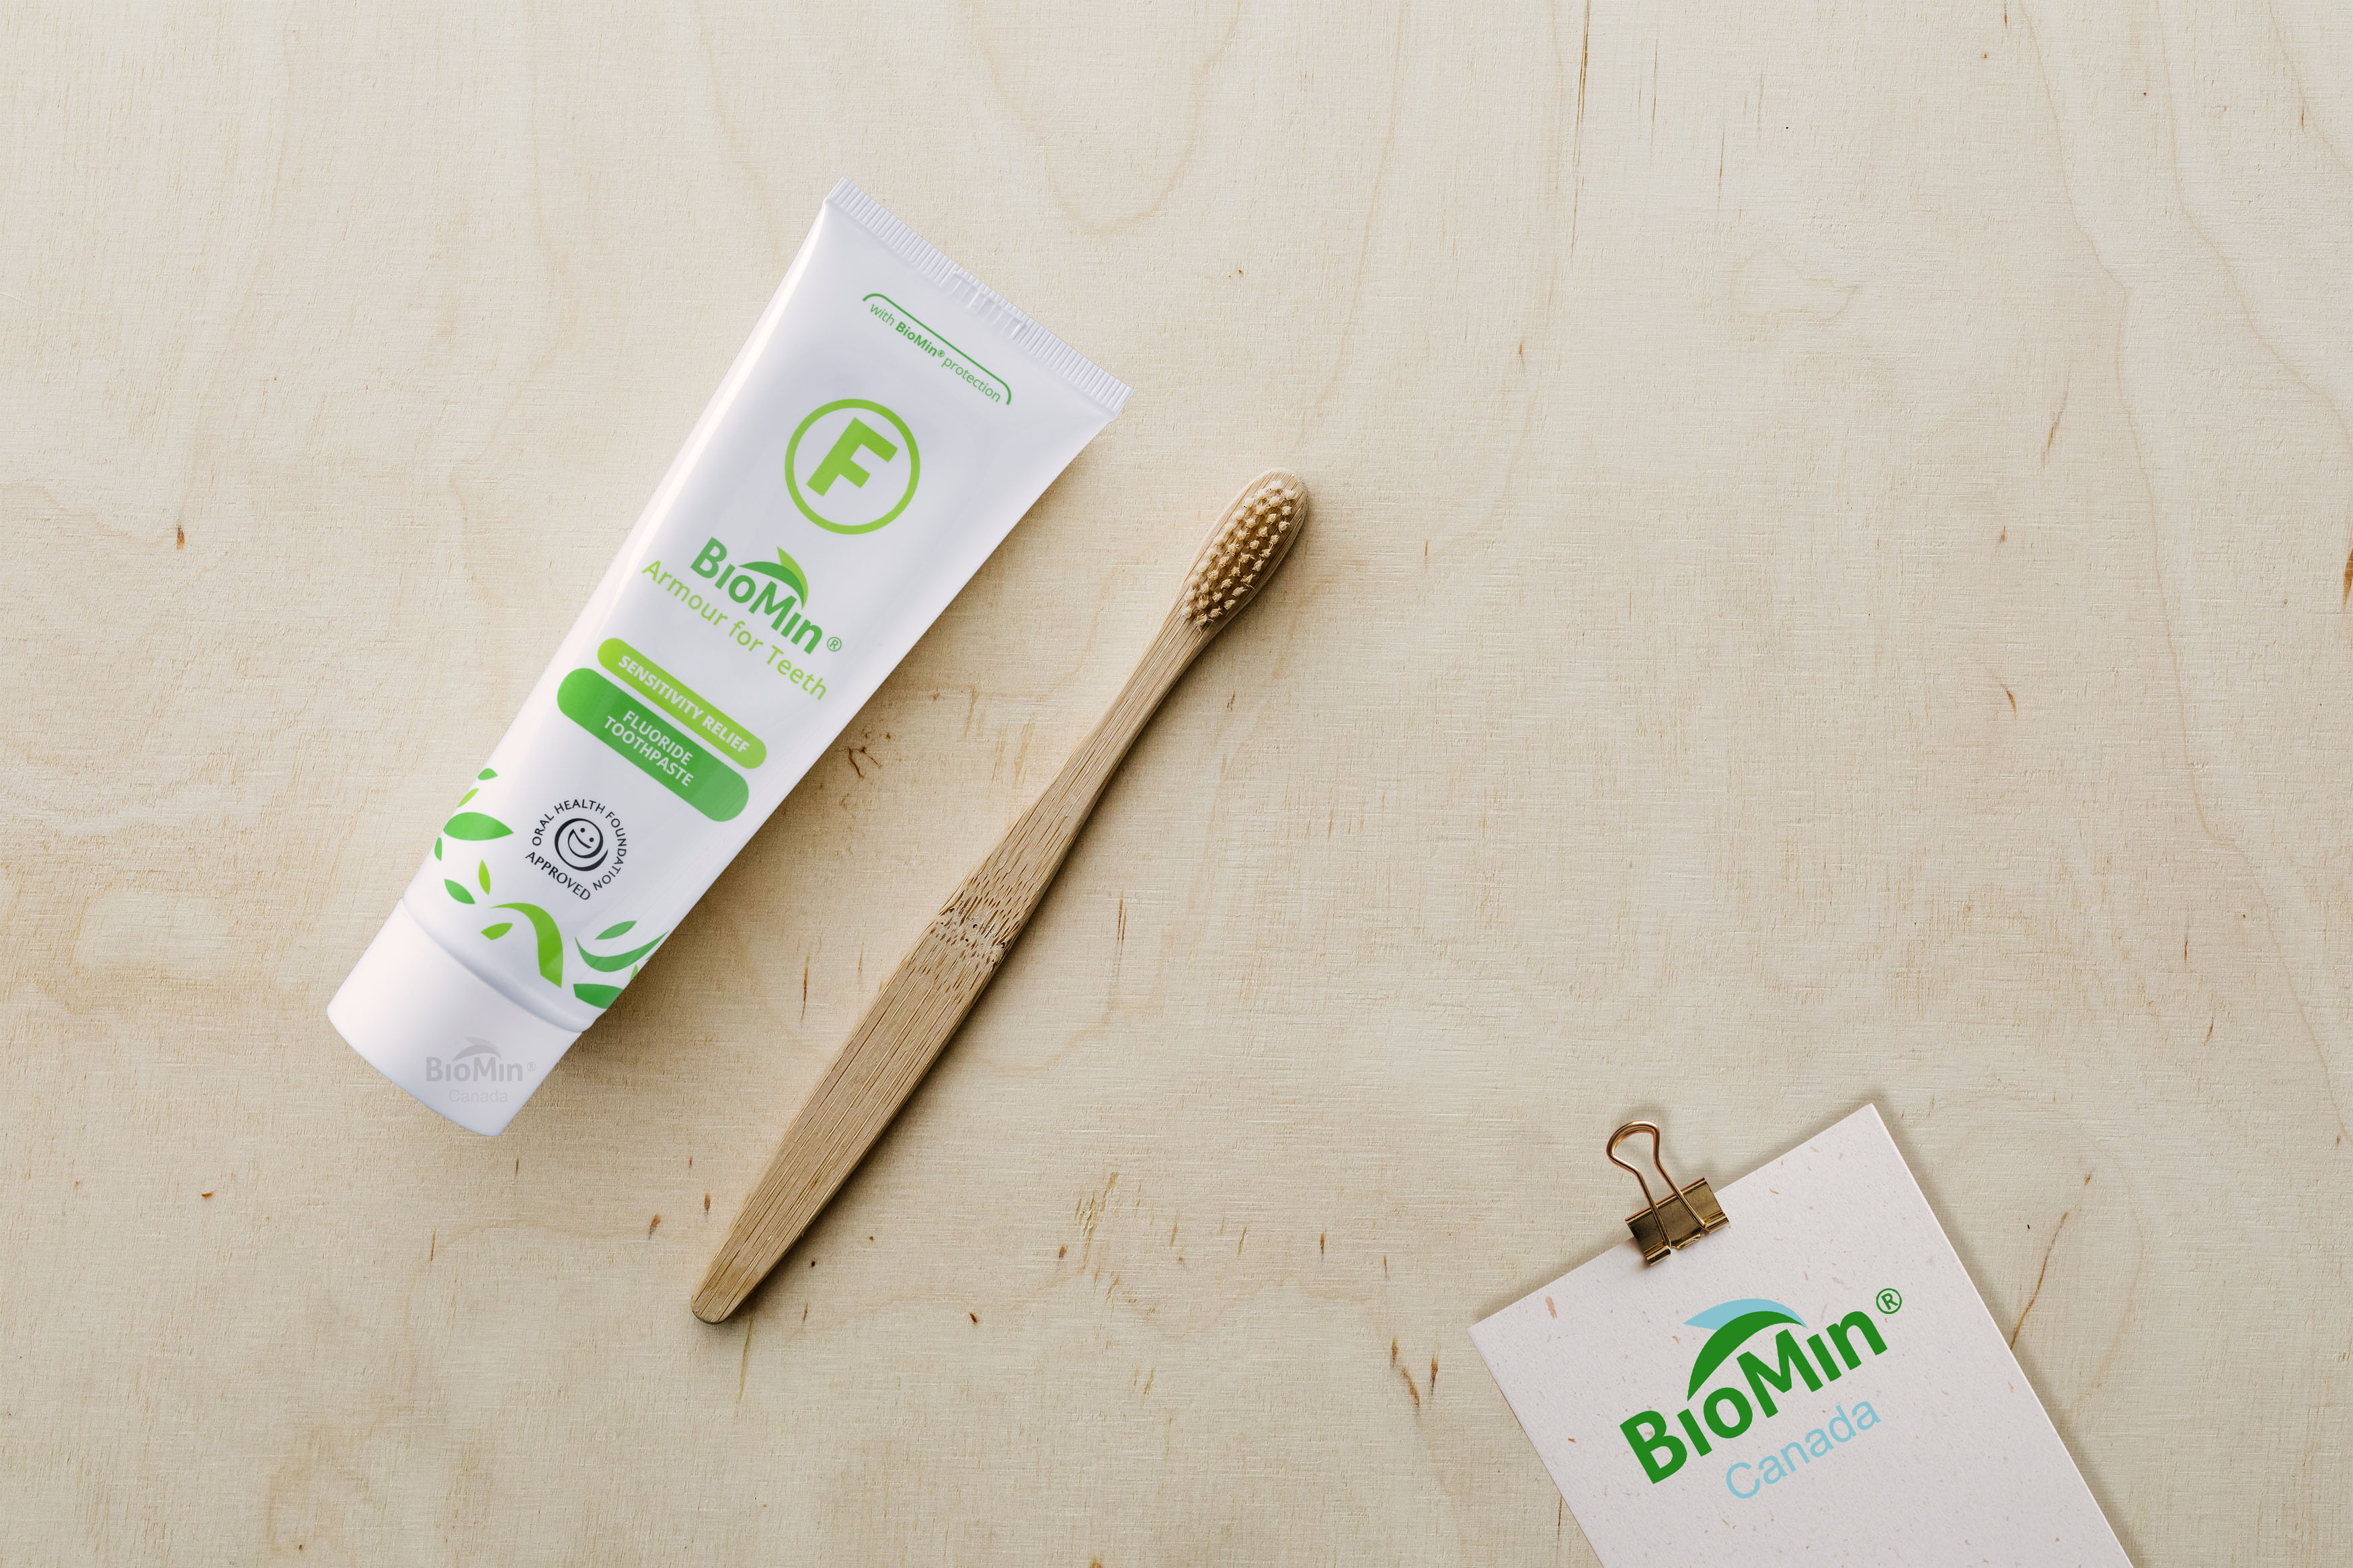 BioMin F toothpaste stands out among the world's best toothpastes for these three reasons